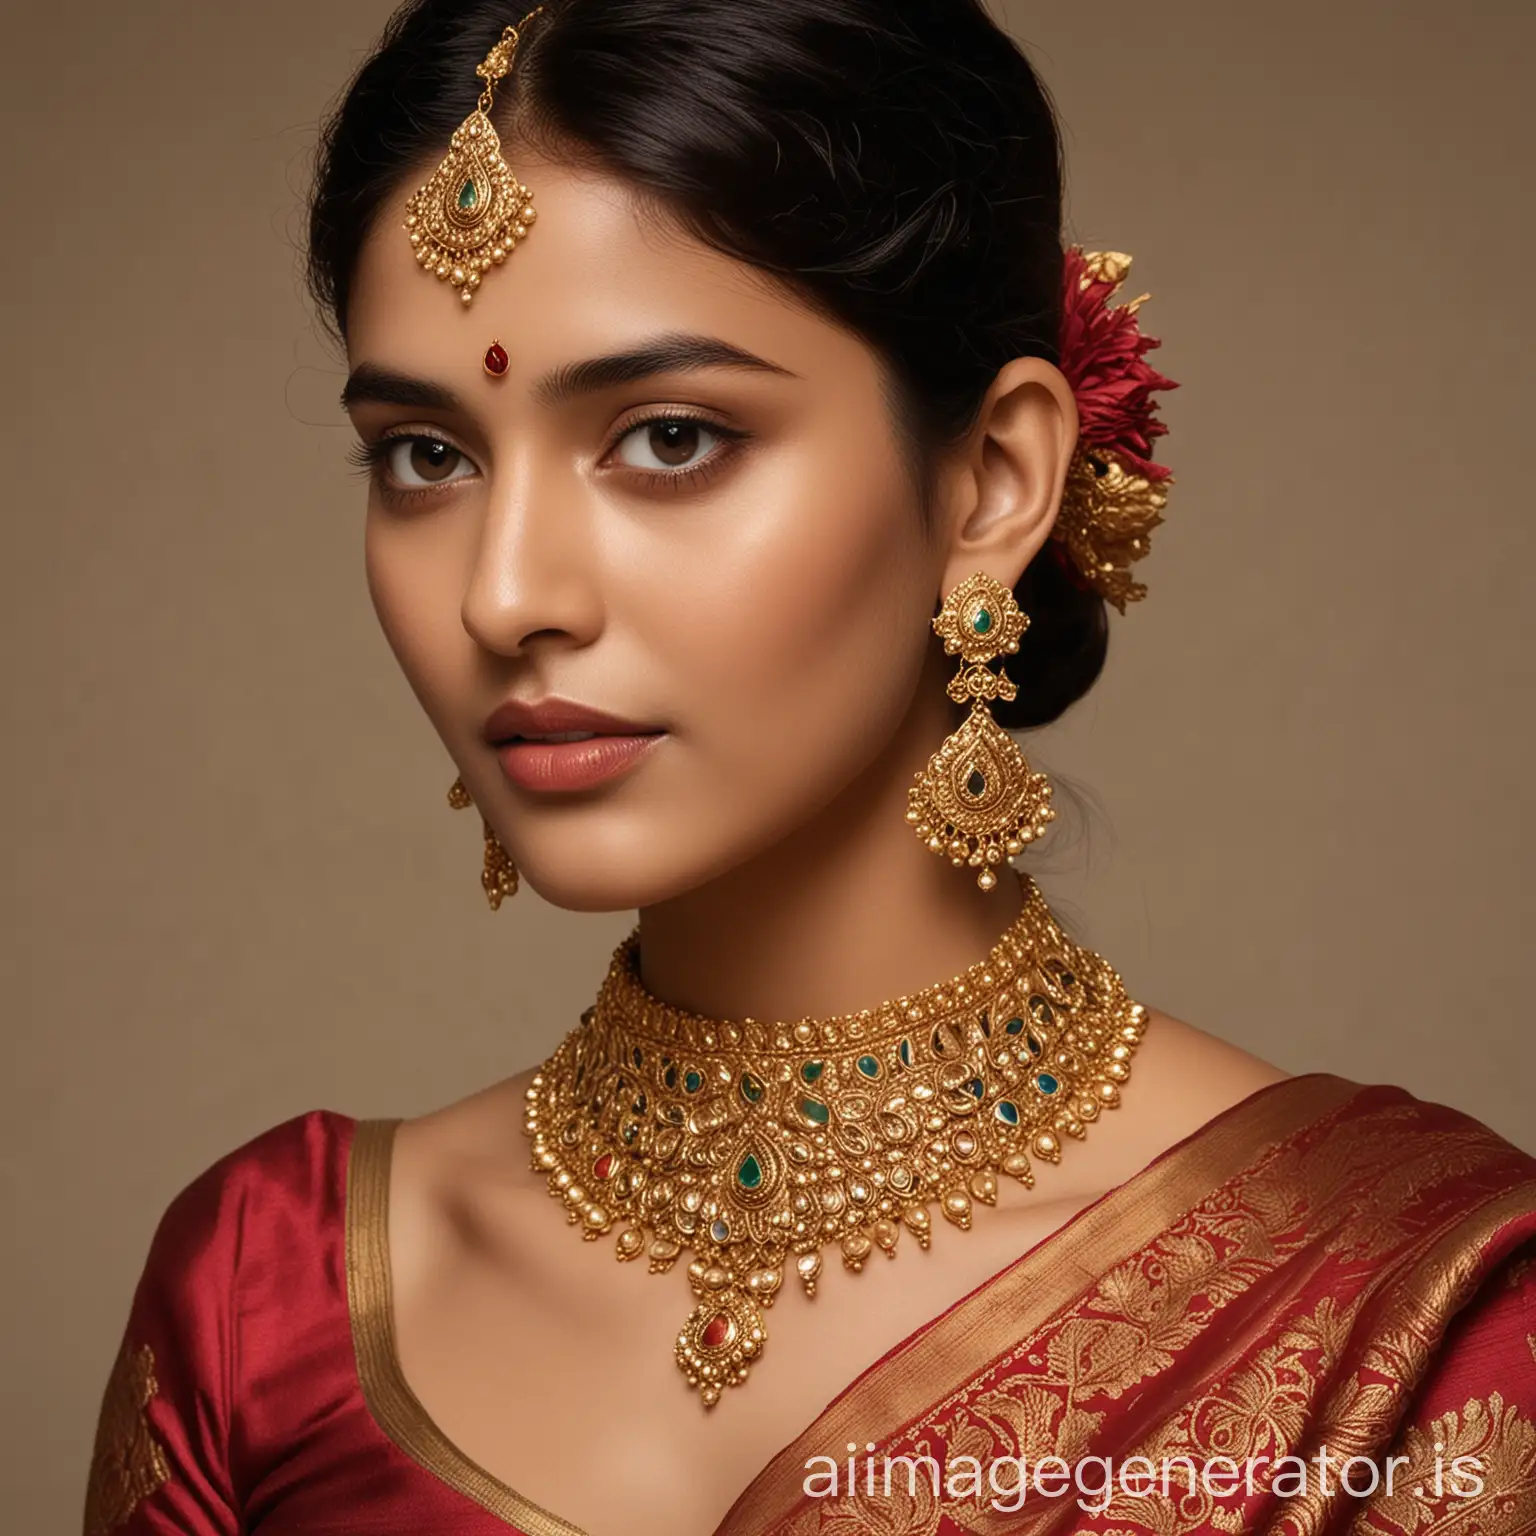 Elegant-South-Indian-Woman-in-Exquisite-Gold-Jewelry-Celebrating-Tradition-and-Opulence